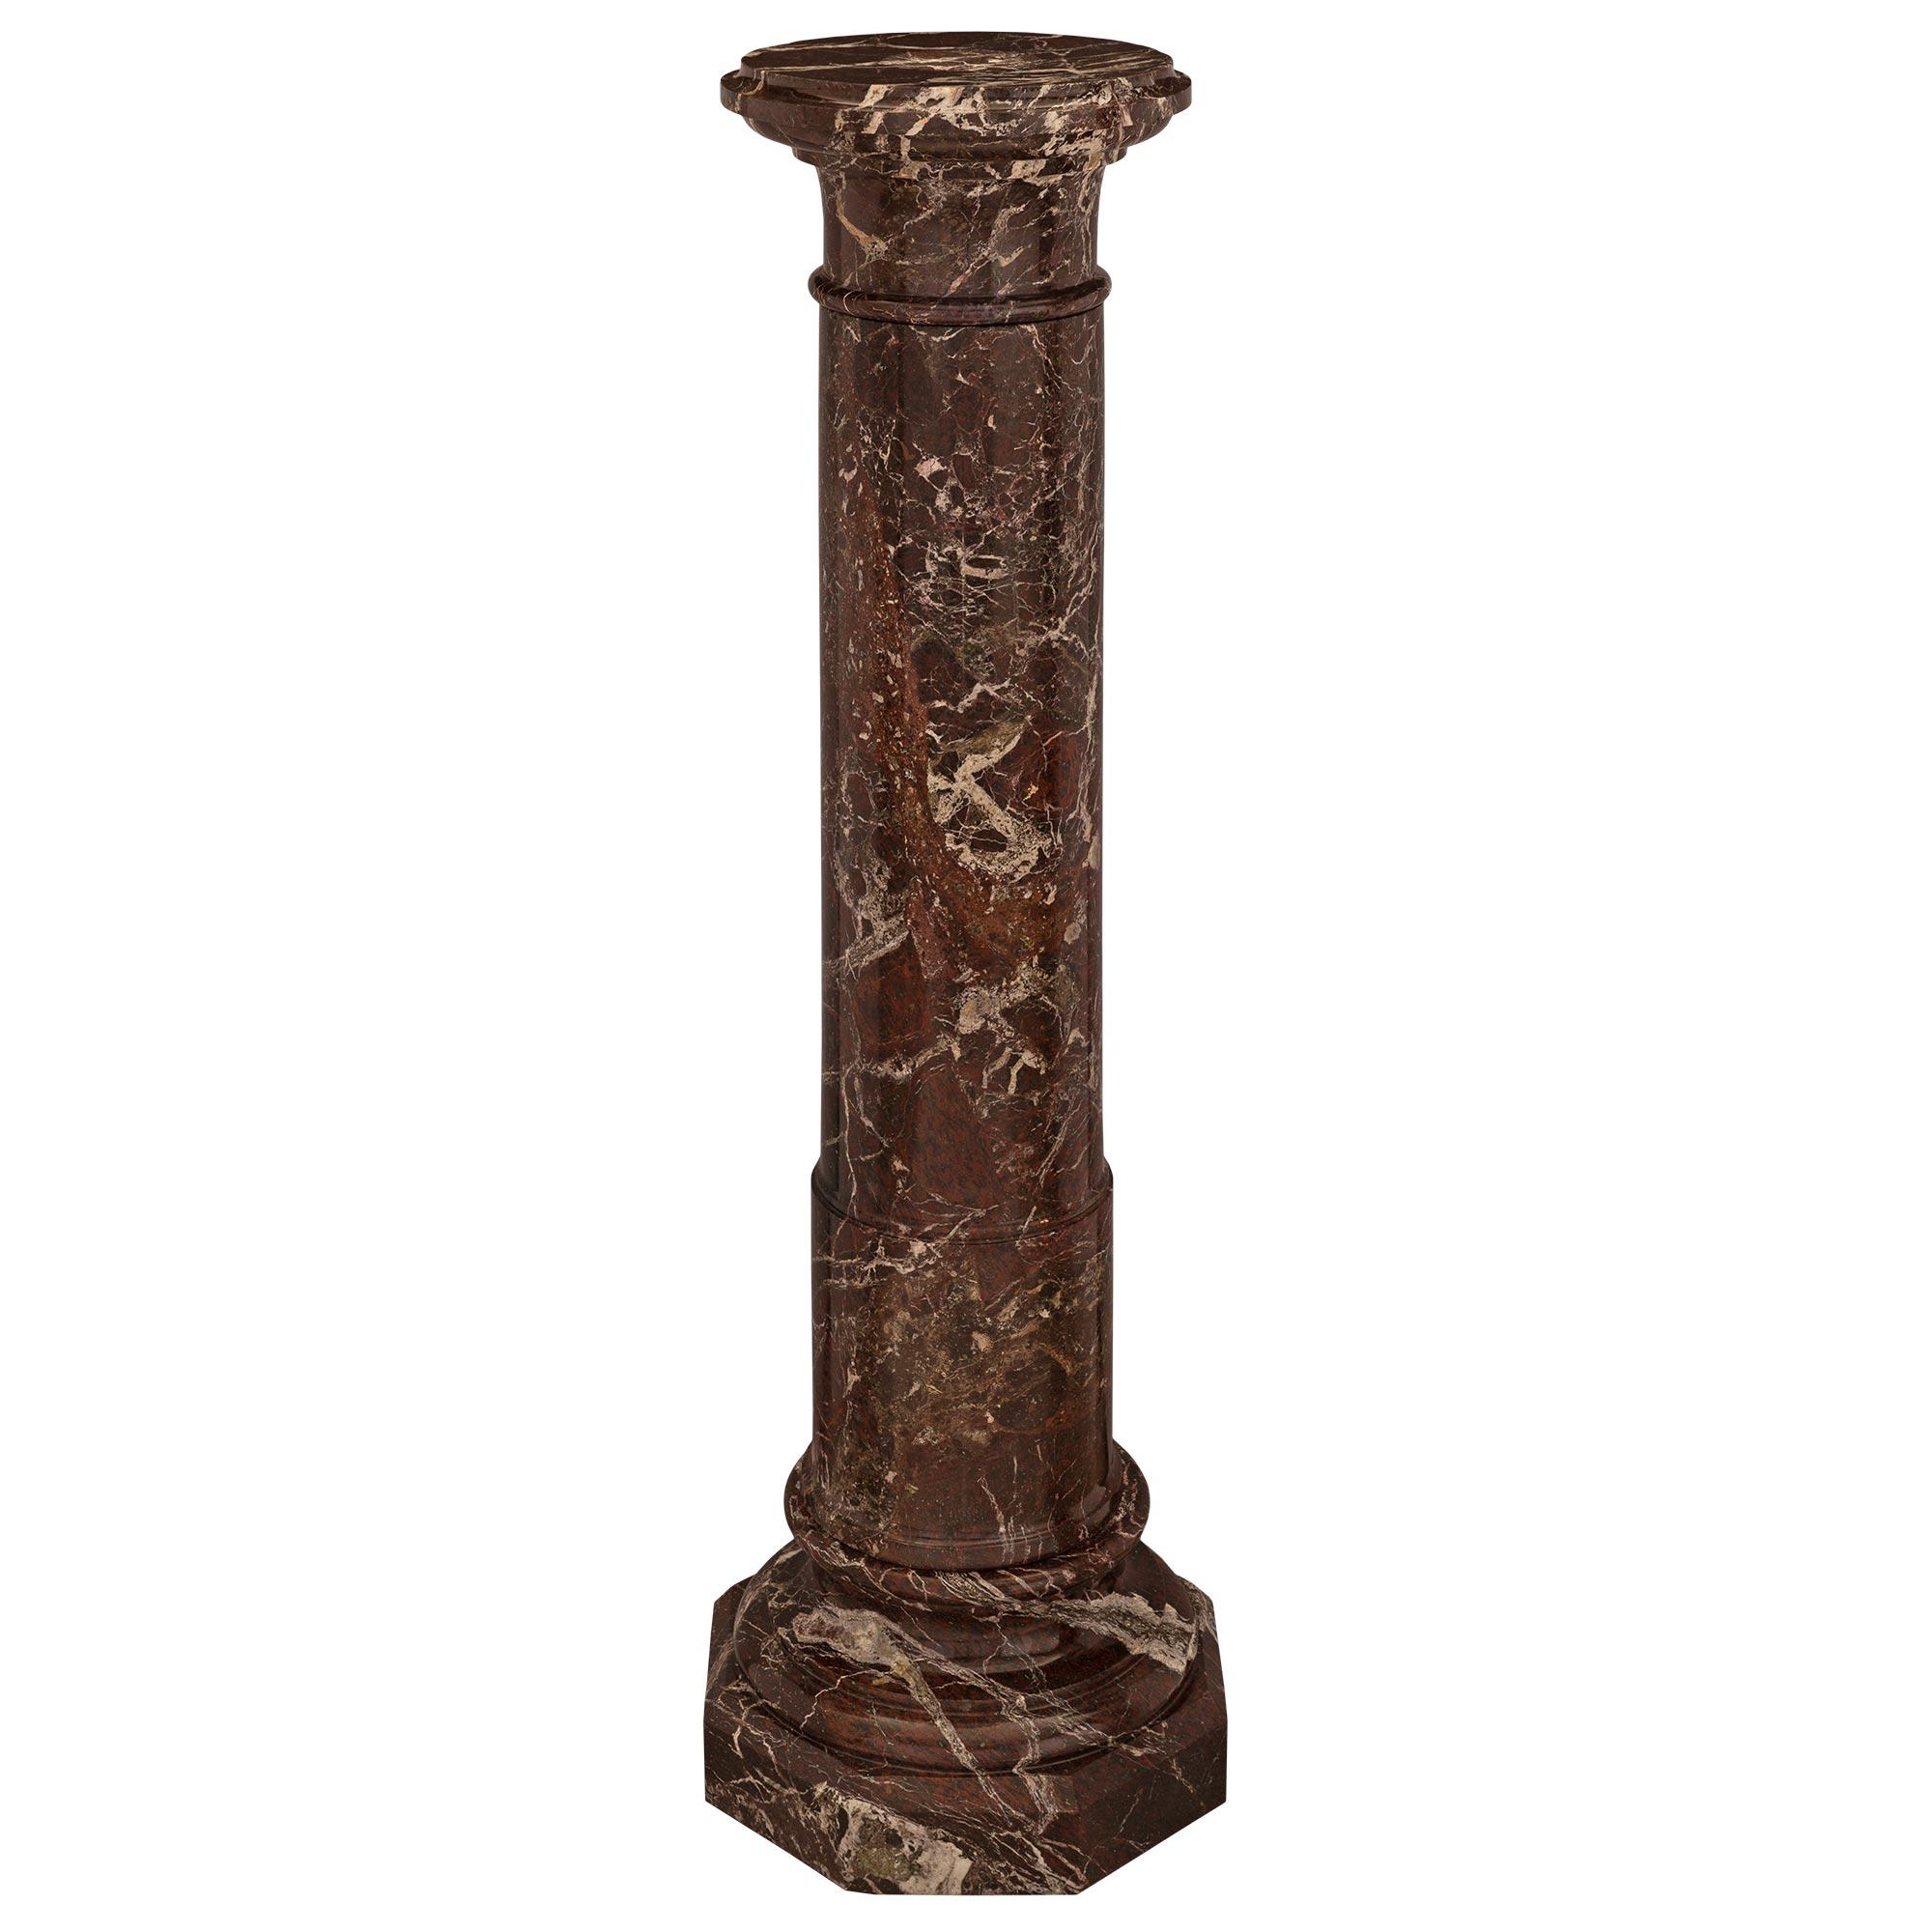 Italian 19th Century Rosso Levanto Marble Pedestal Column In Good Condition For Sale In West Palm Beach, FL